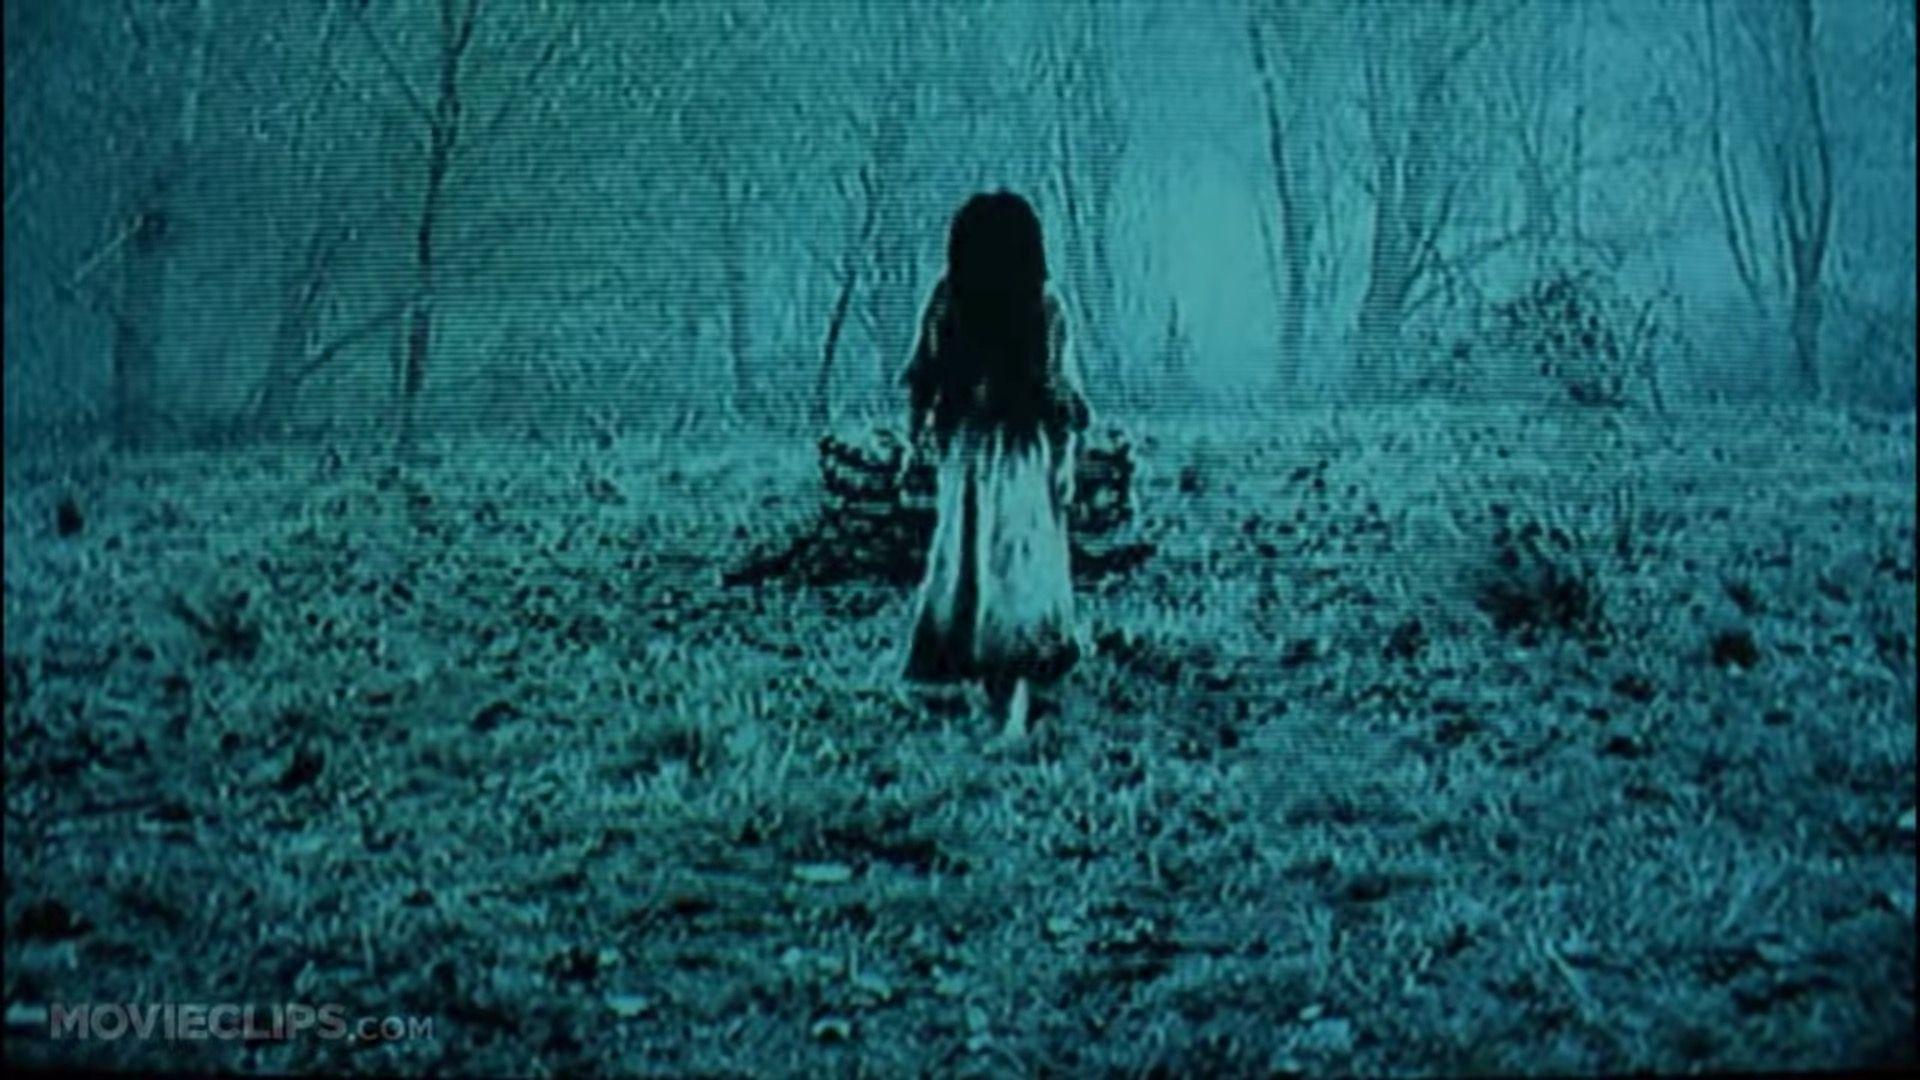 The Ring movie's creepy ending is still amazing to this day